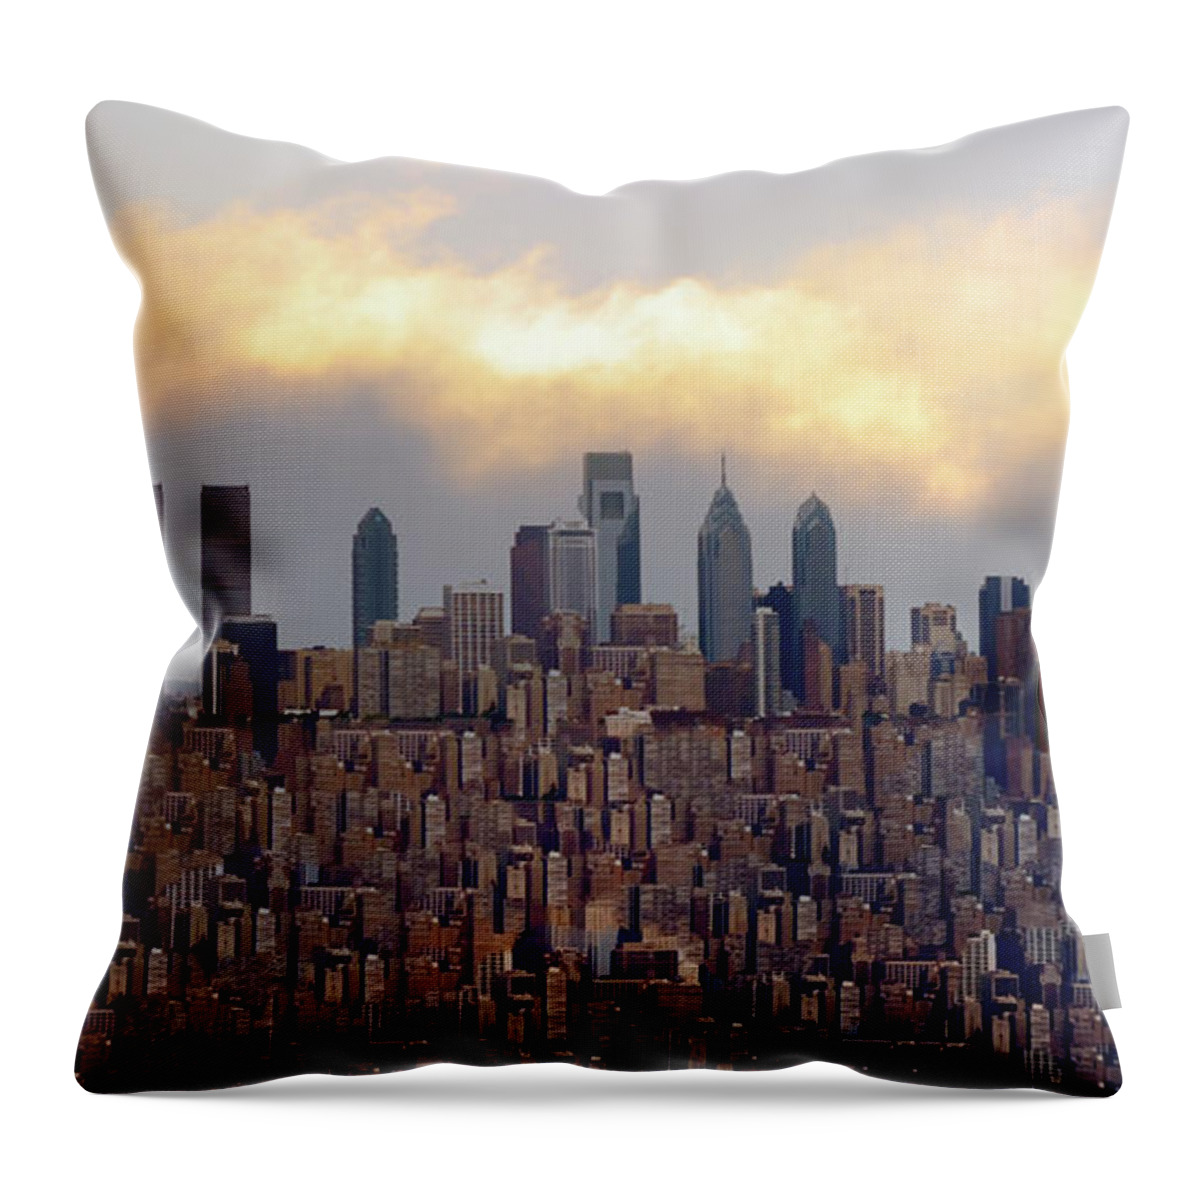 Philadelphia Throw Pillow featuring the photograph The Bigger City by Bill Cannon